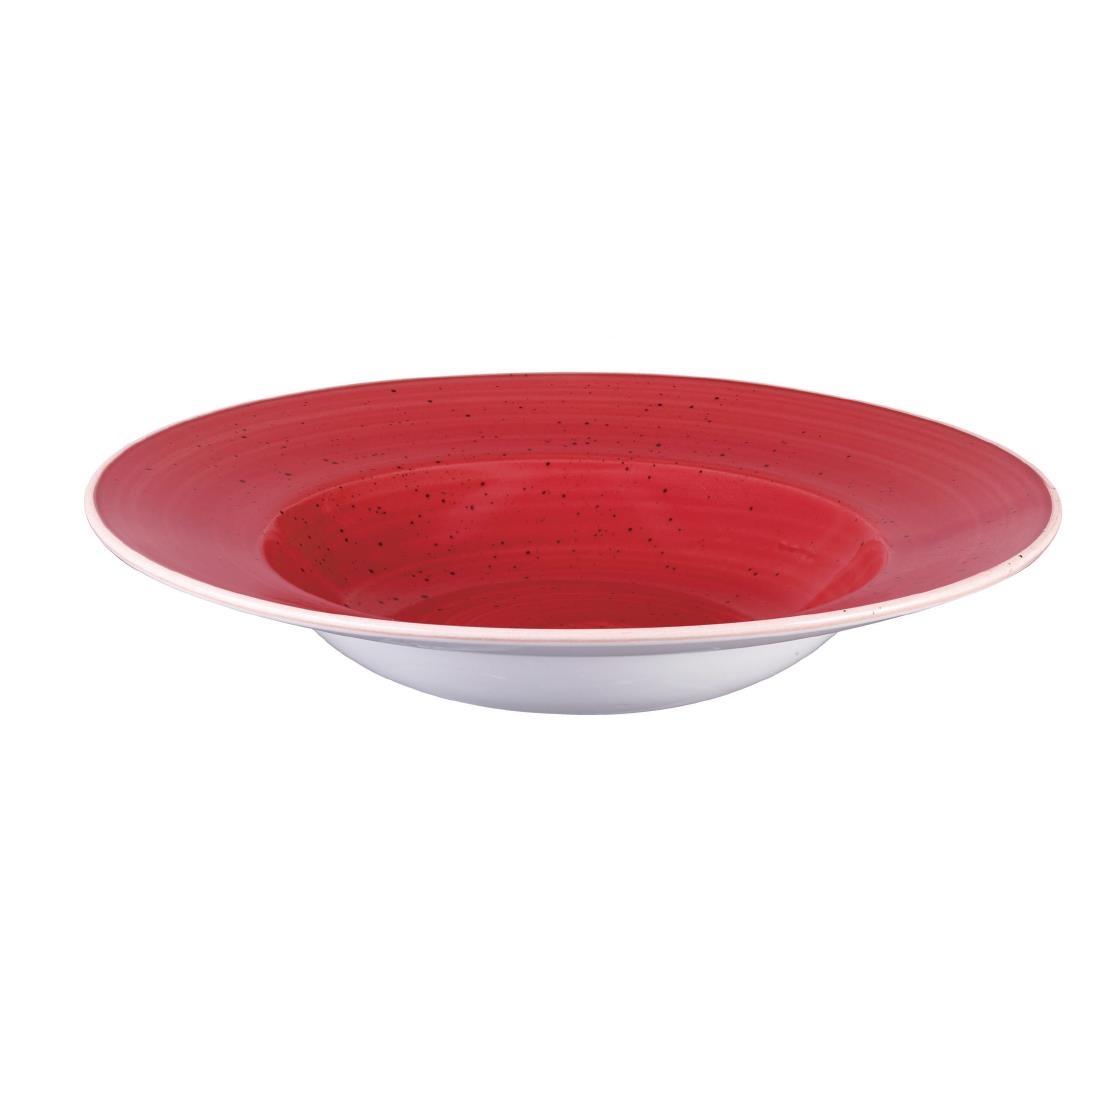 Churchill Stonecast Round Wide Rim Bowl Berry Red 280mm (Pack of 12) - DM466  - 2